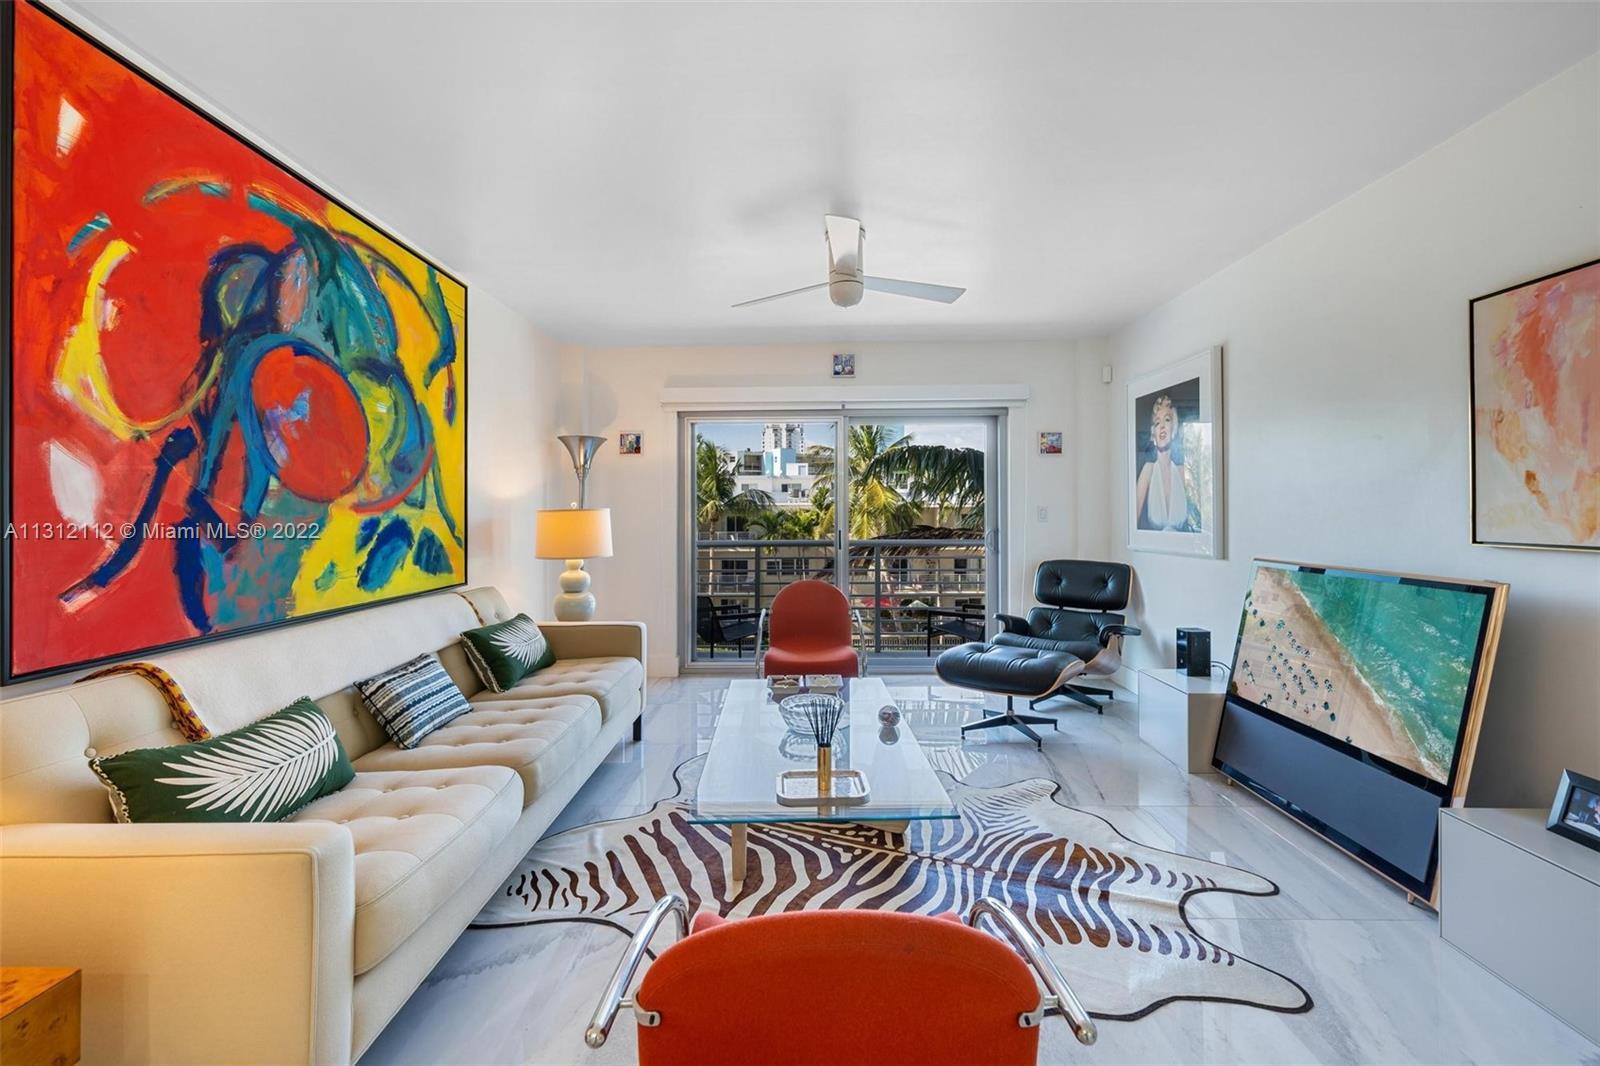 Totally remodeled remodeled apartment in South Beach best location. Quiet cul de sac on Lincoln rd. 